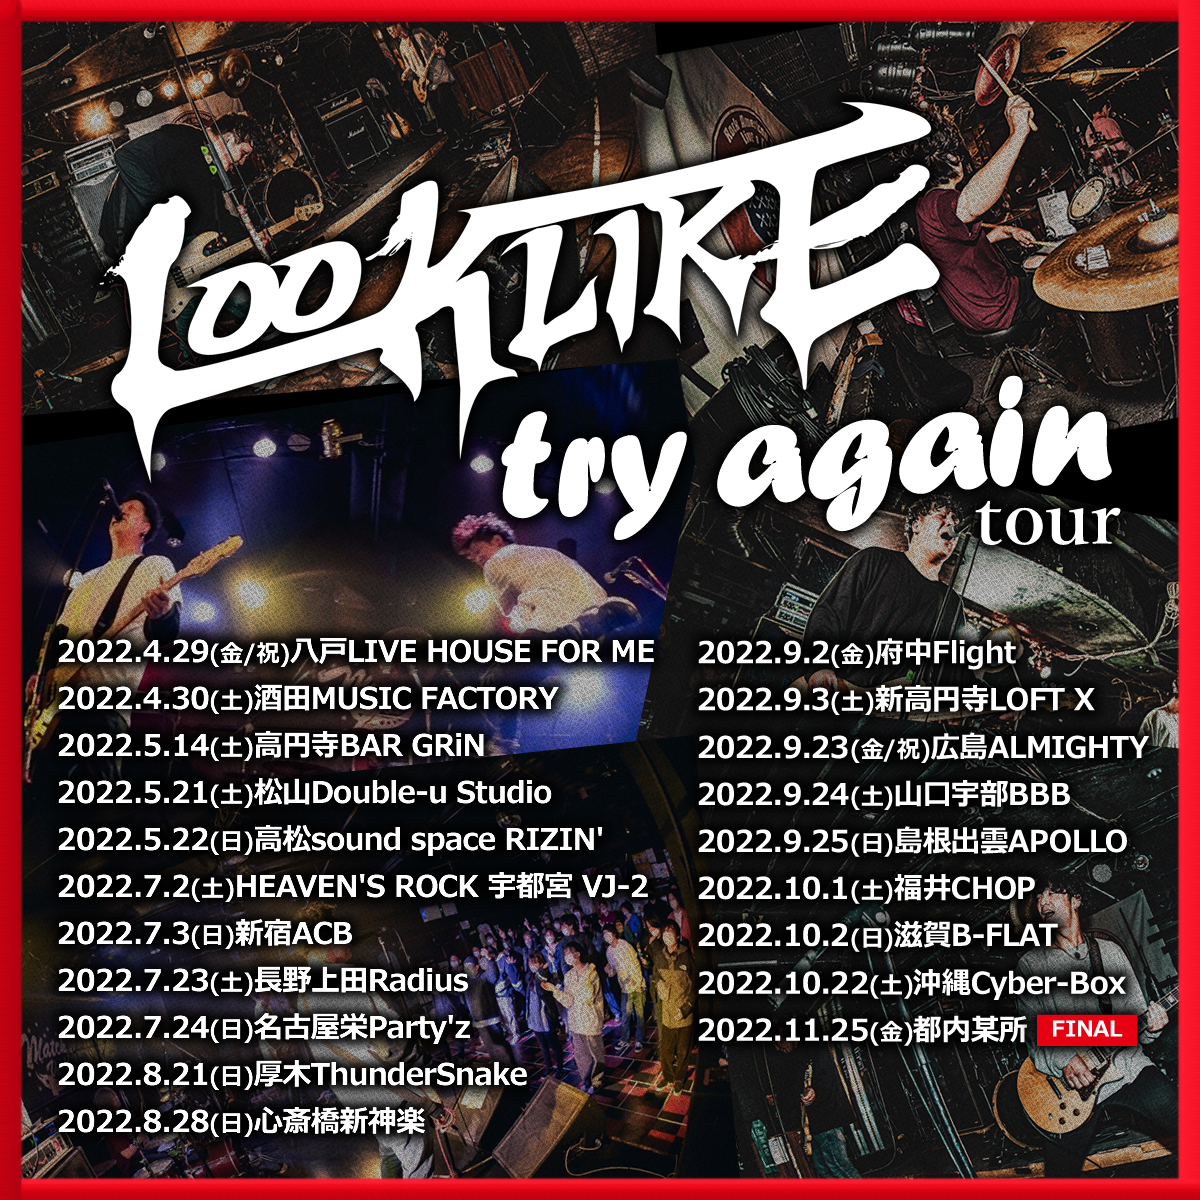 try again tour